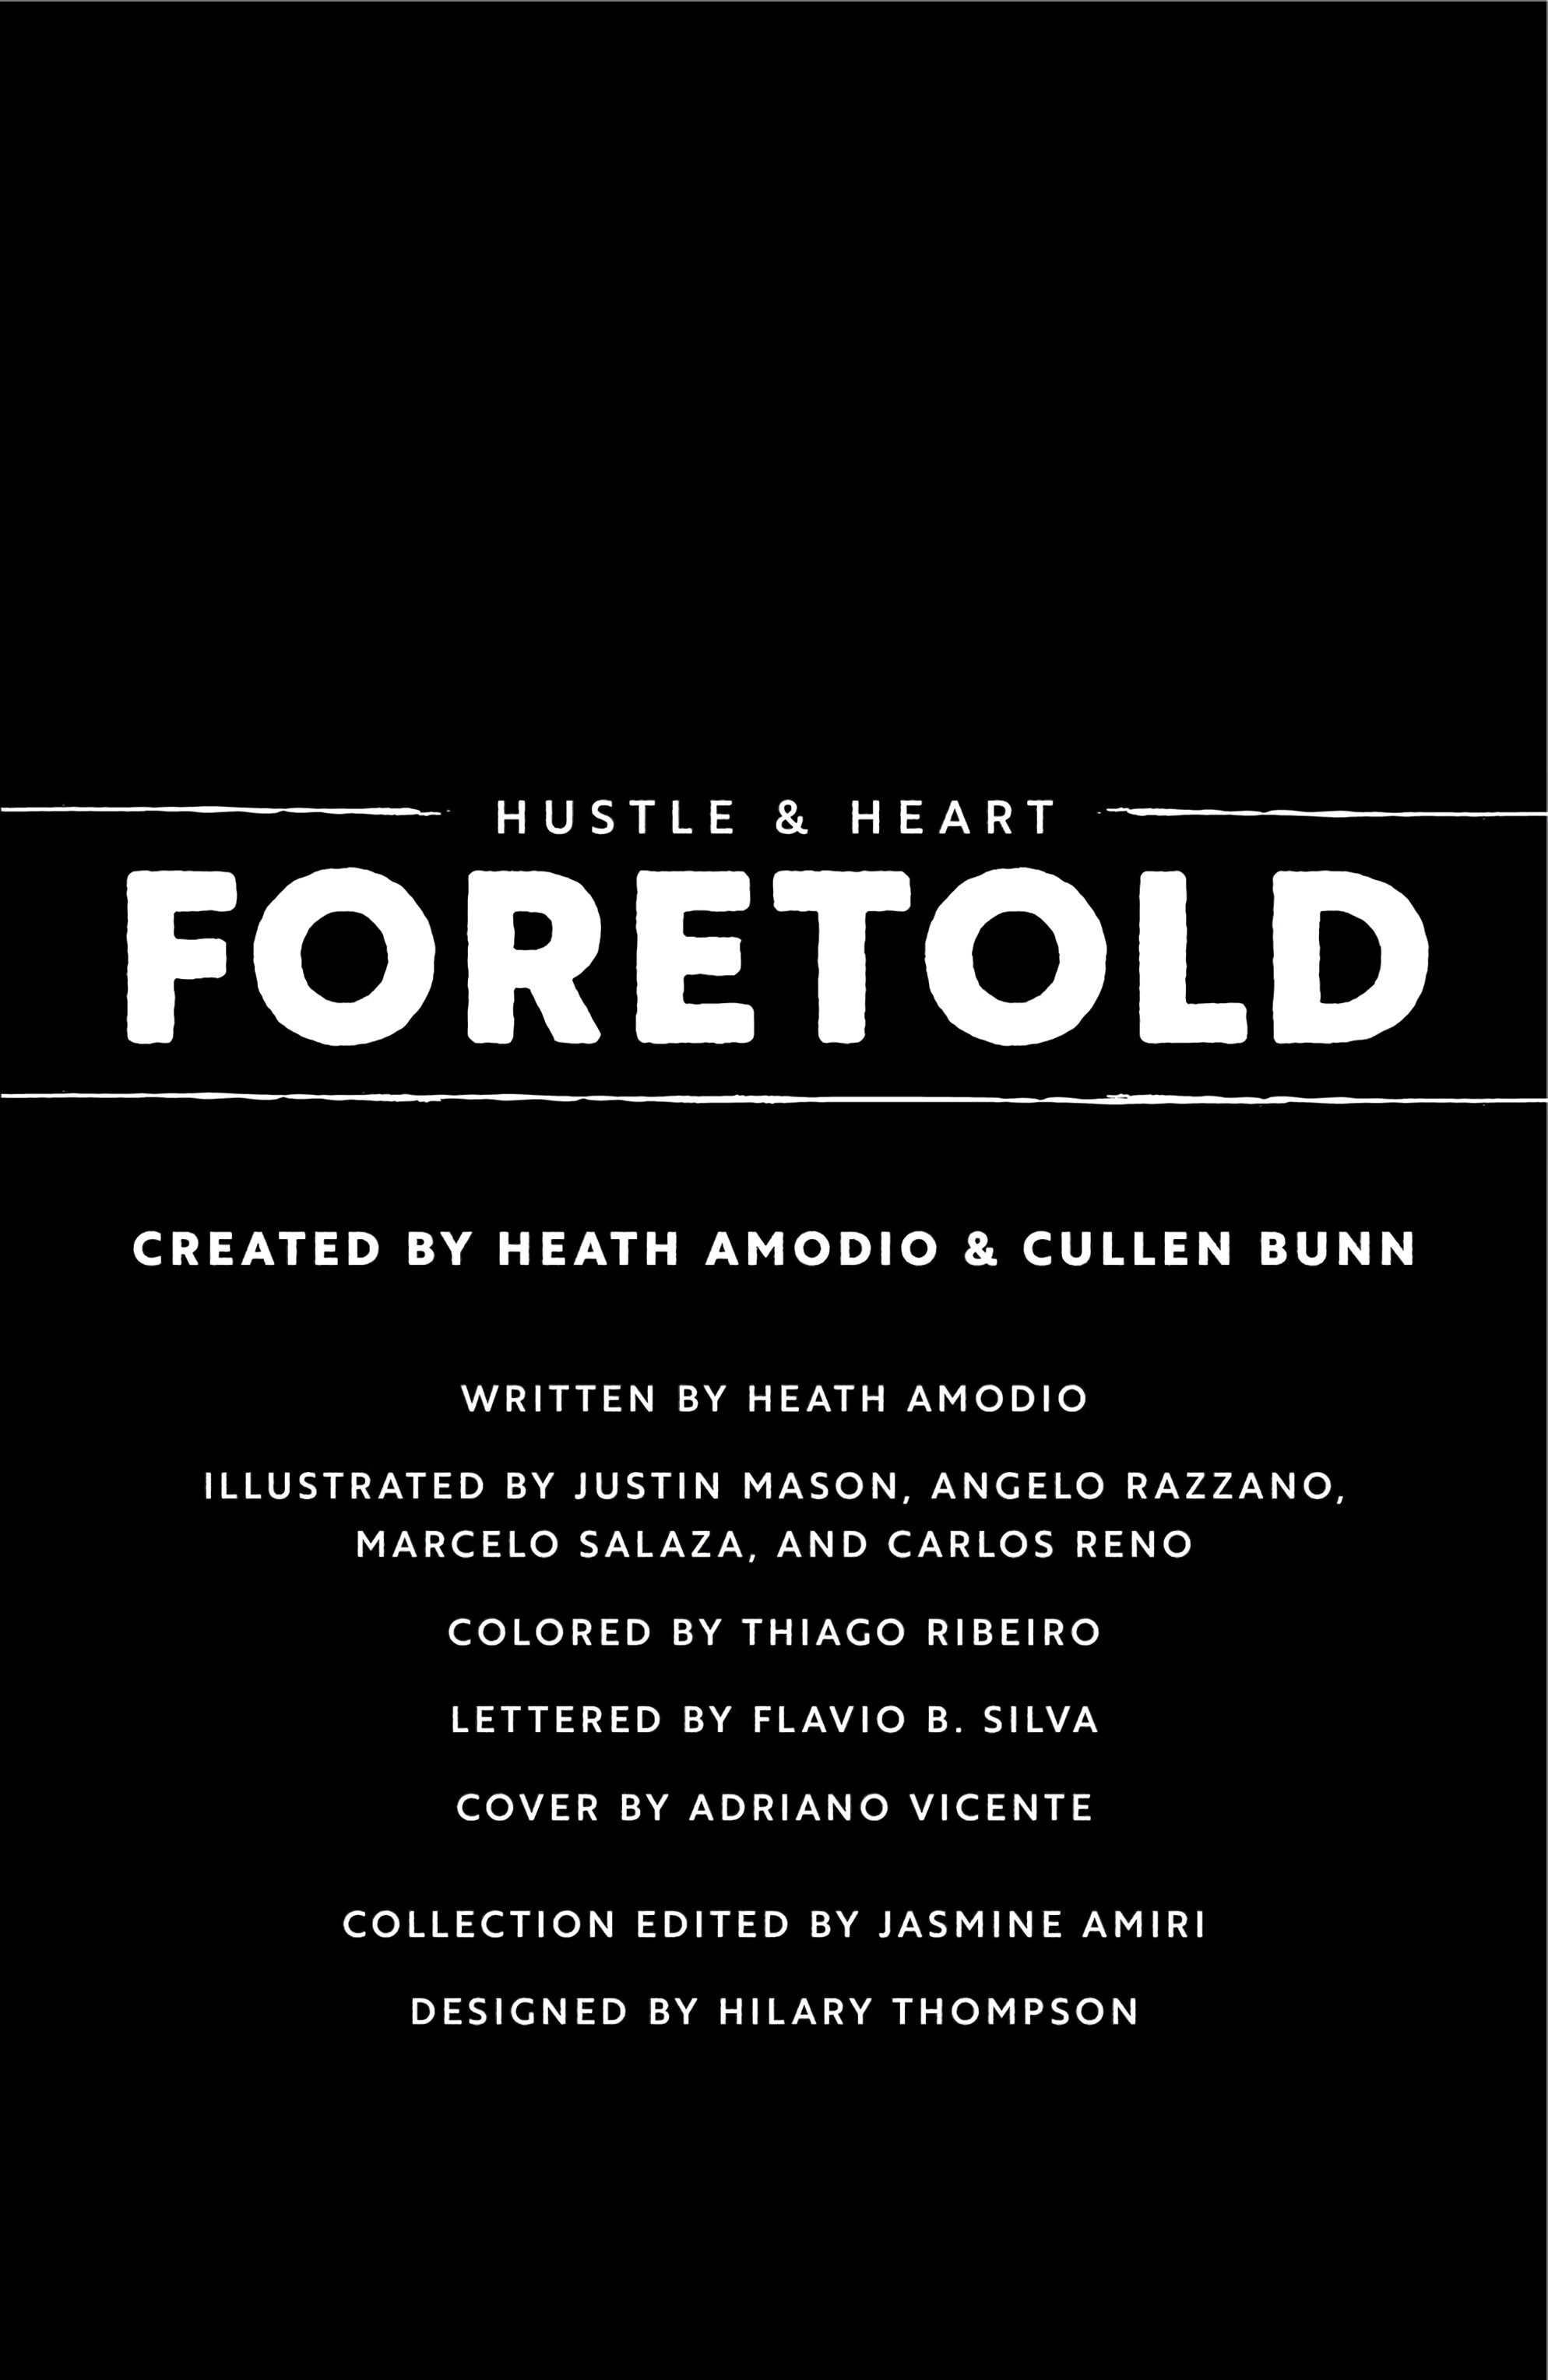 Read online Hustle and Heart: Foretold comic -  Issue # TPB - 3